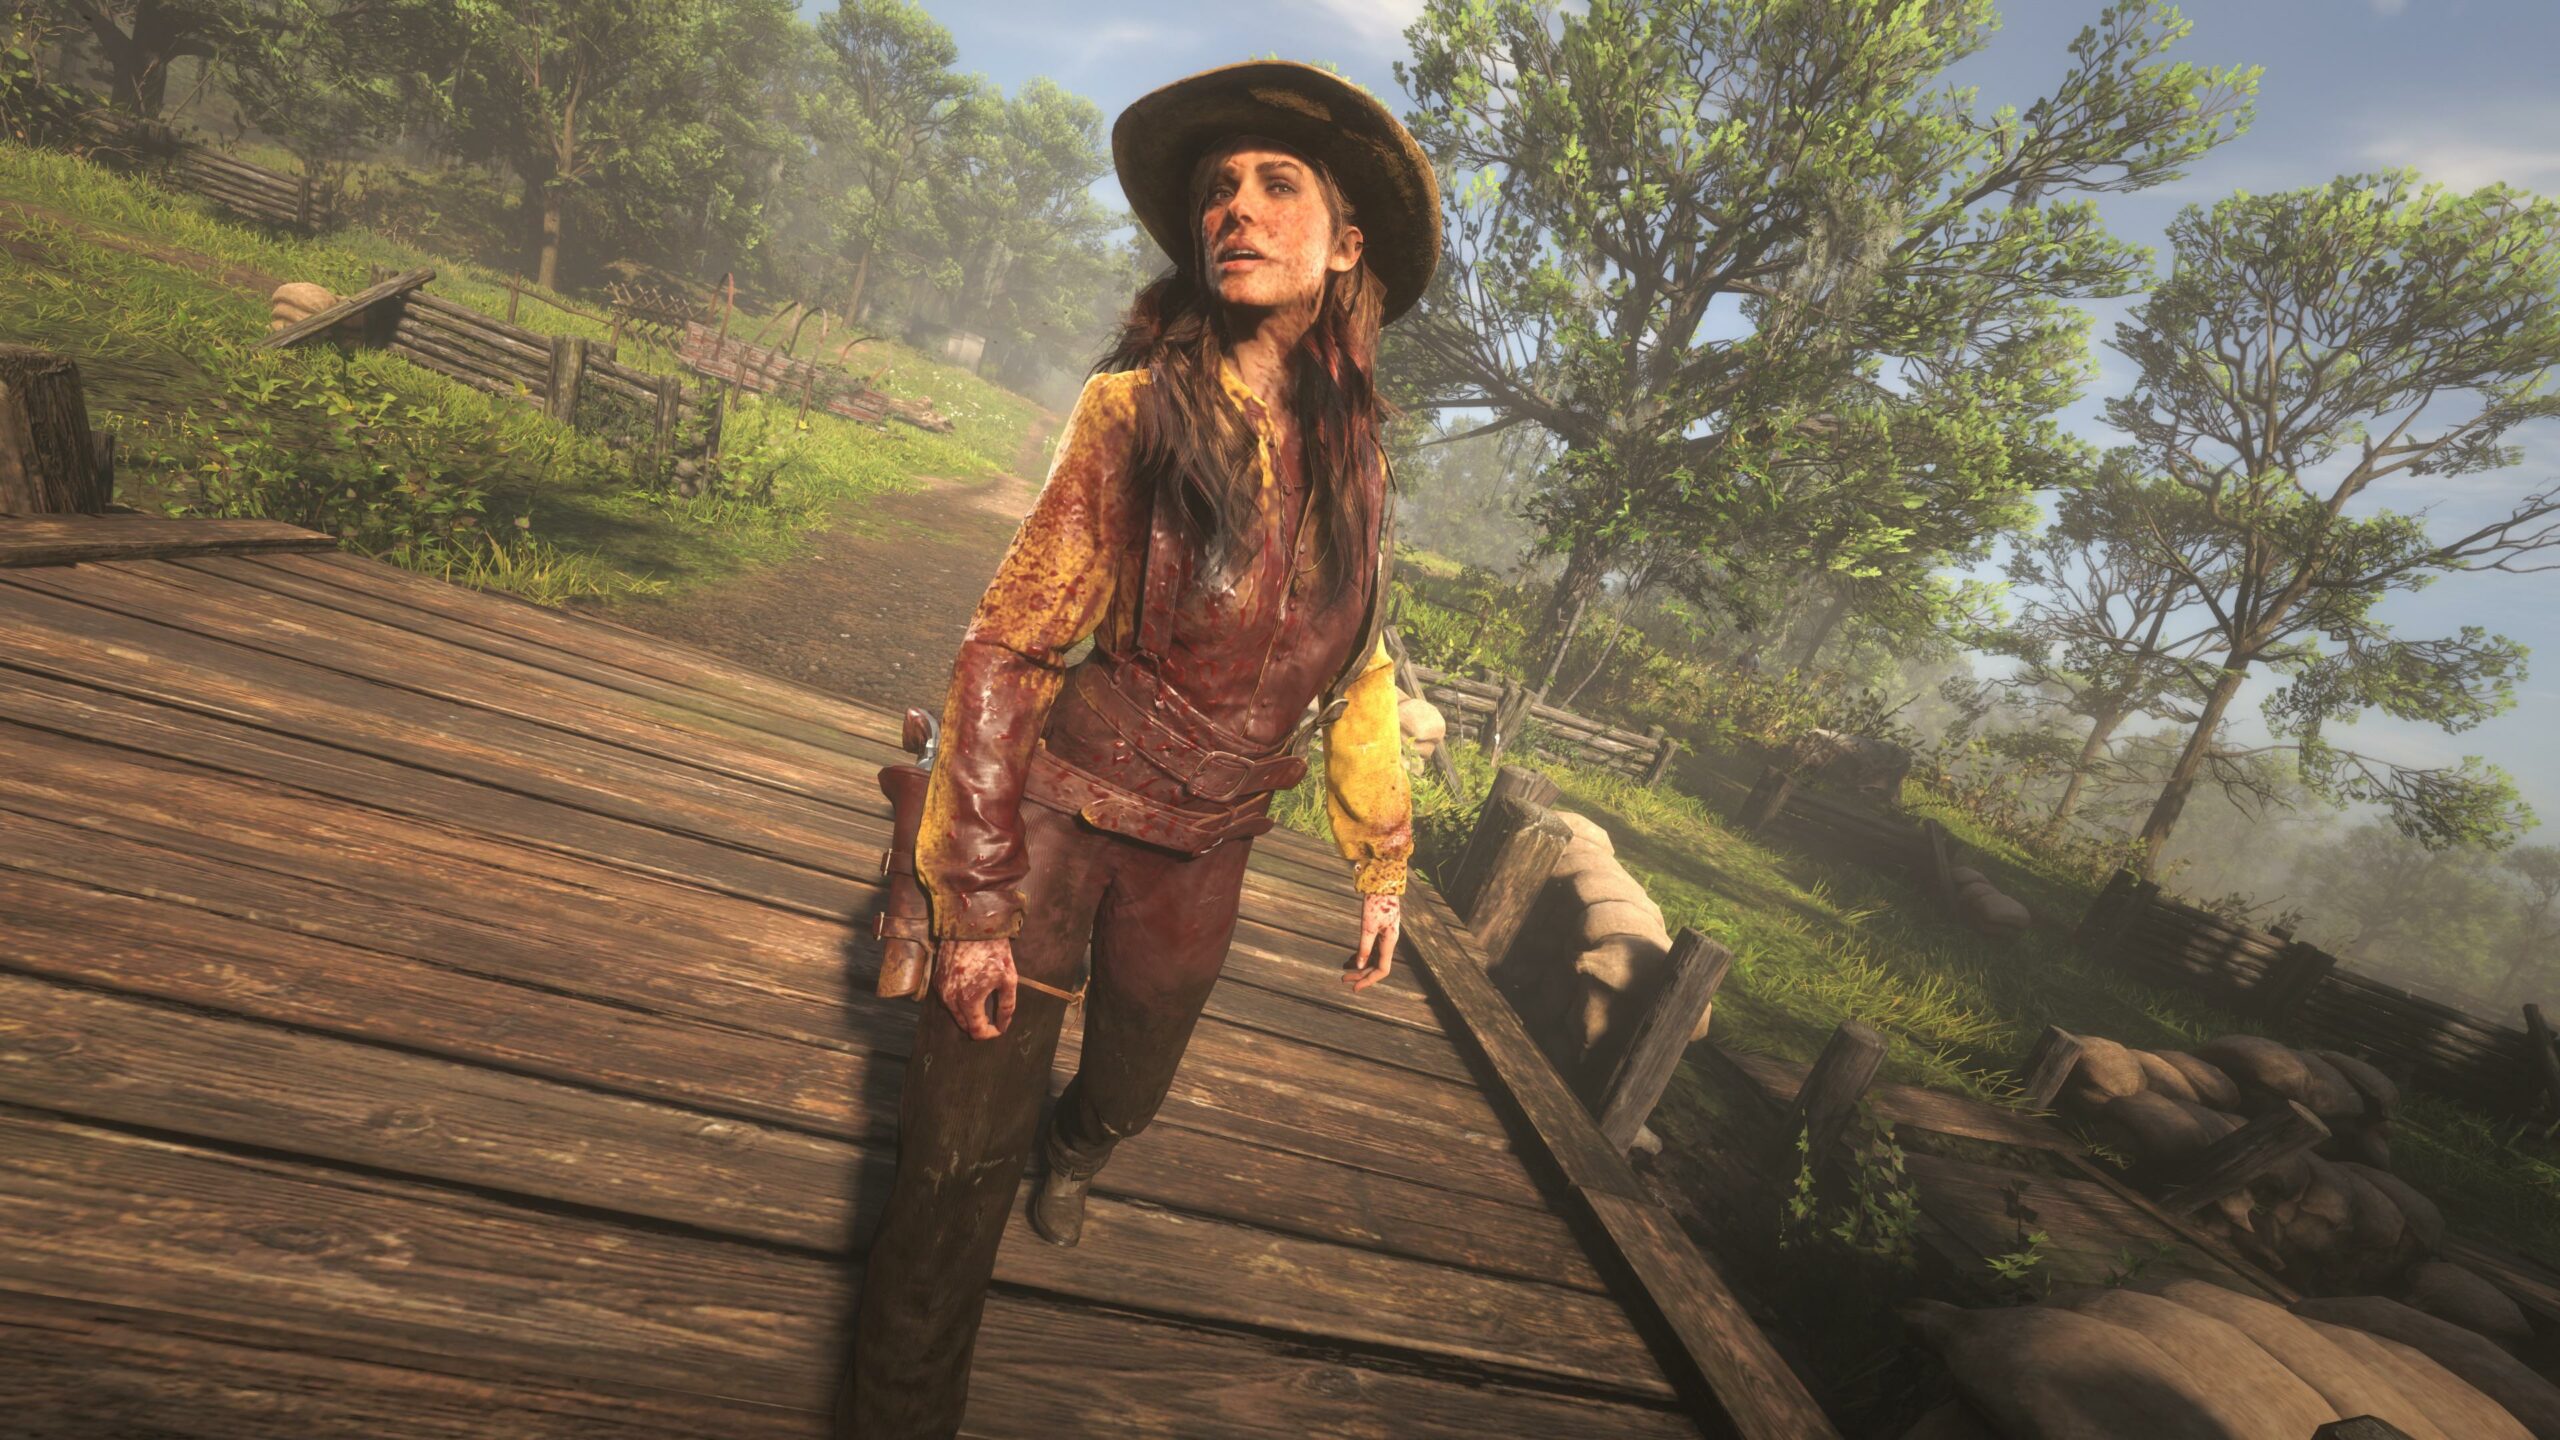 Sadie Adler just casually walking around covered in blood at camp after ...